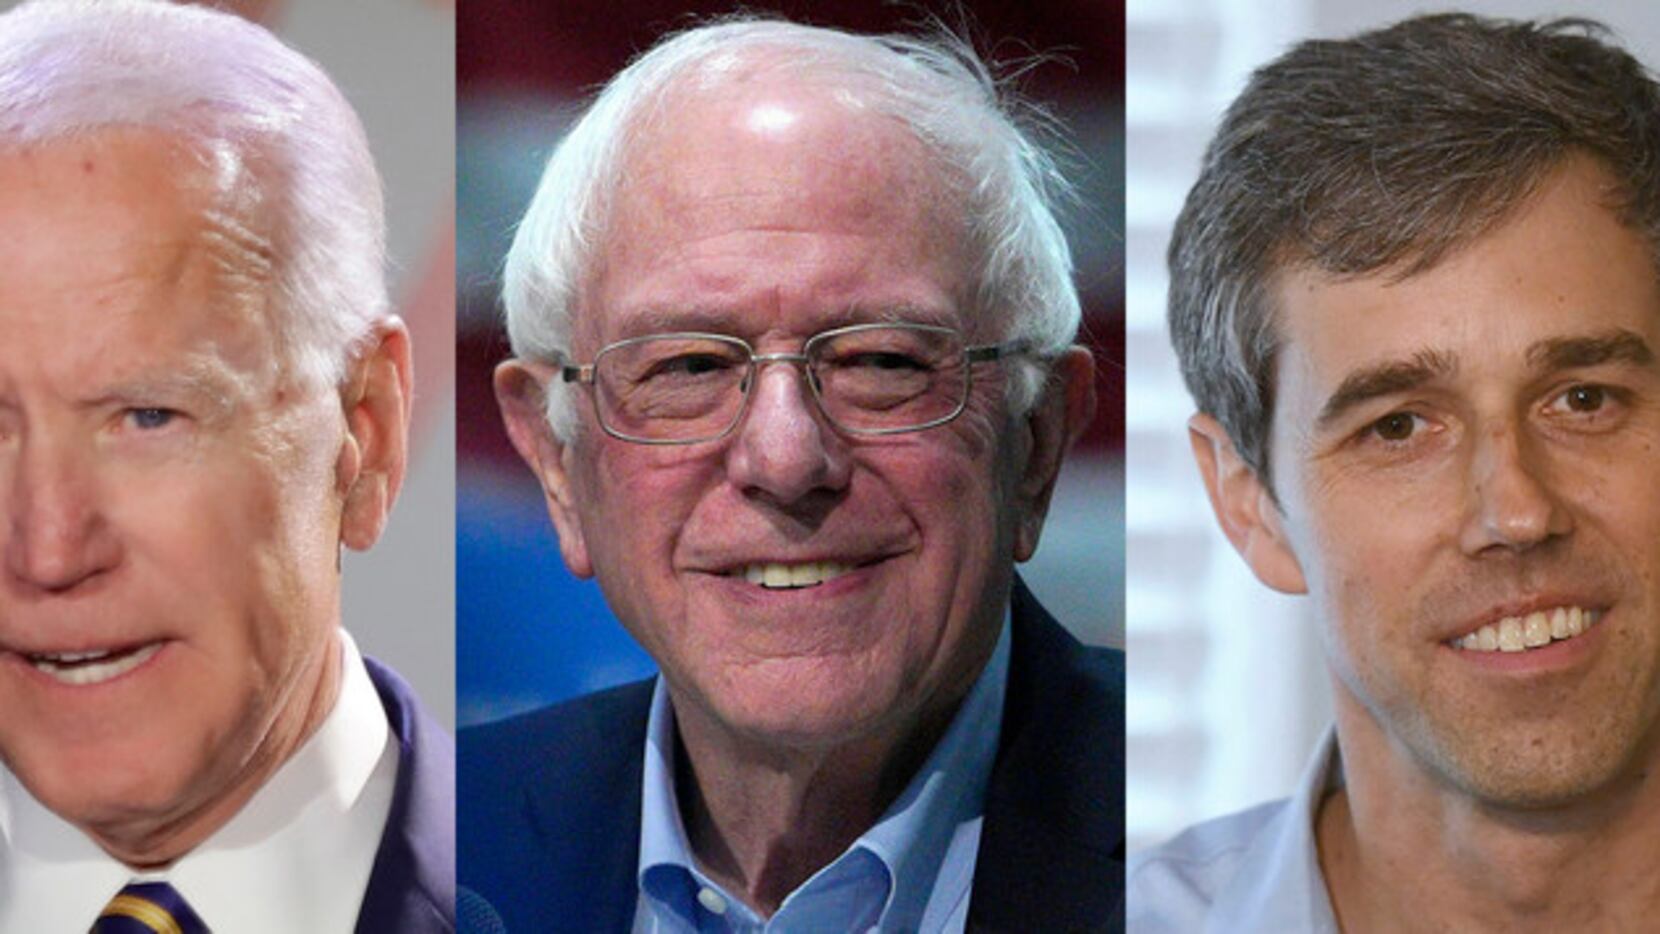 Based on current polling, the top four contenders for the Democratic presidential nomination...